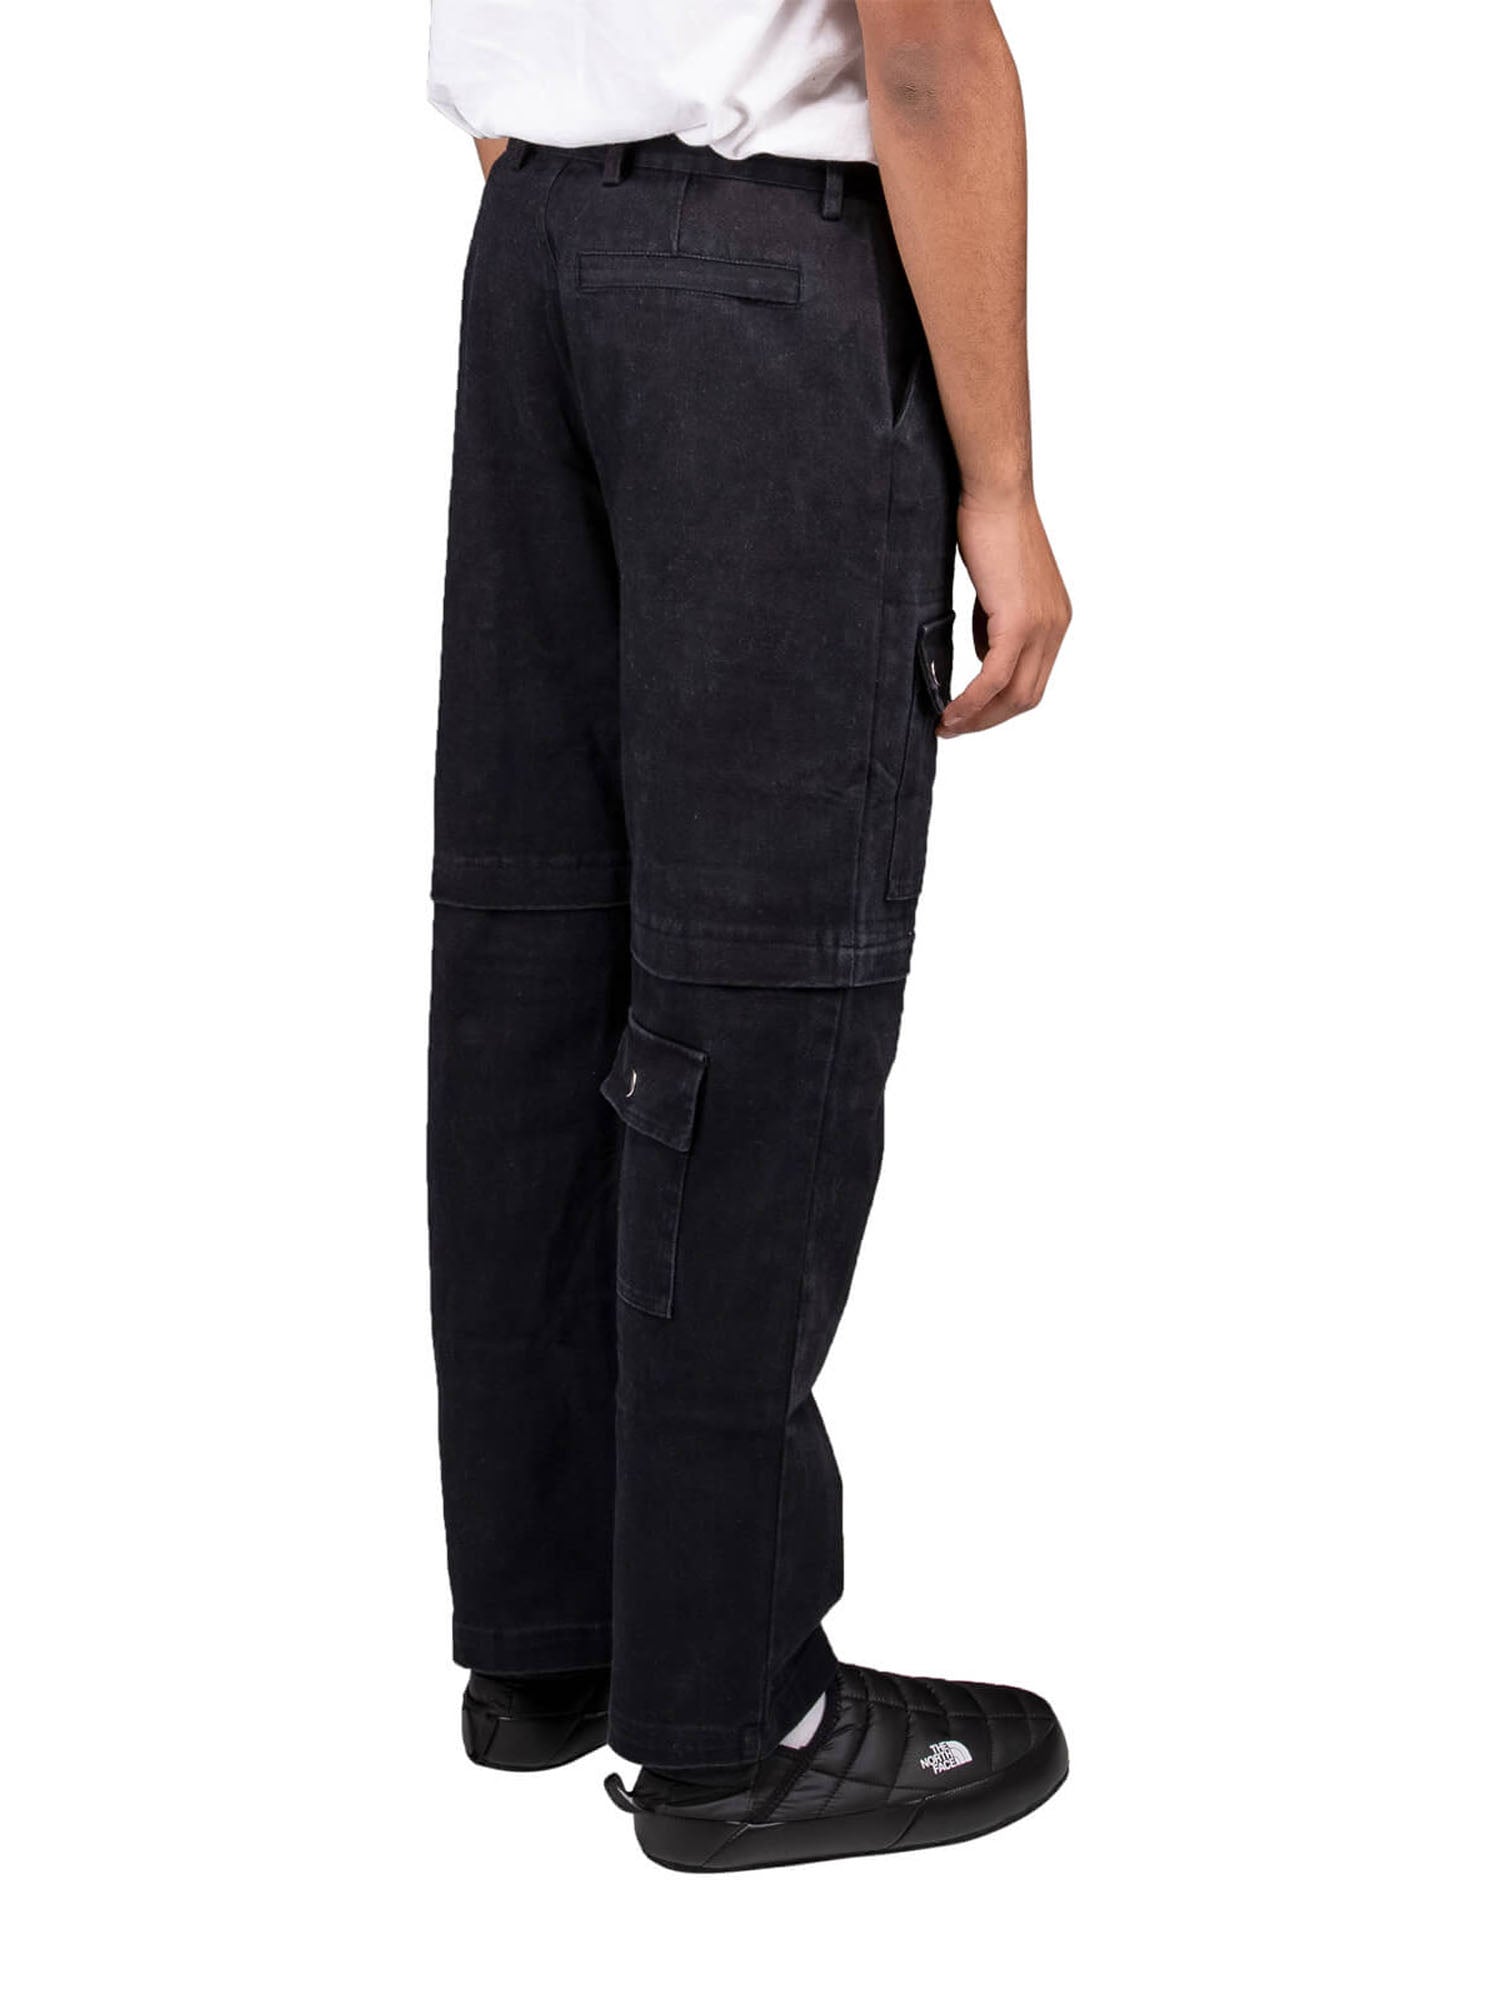 Or - Twill Cargo Pant